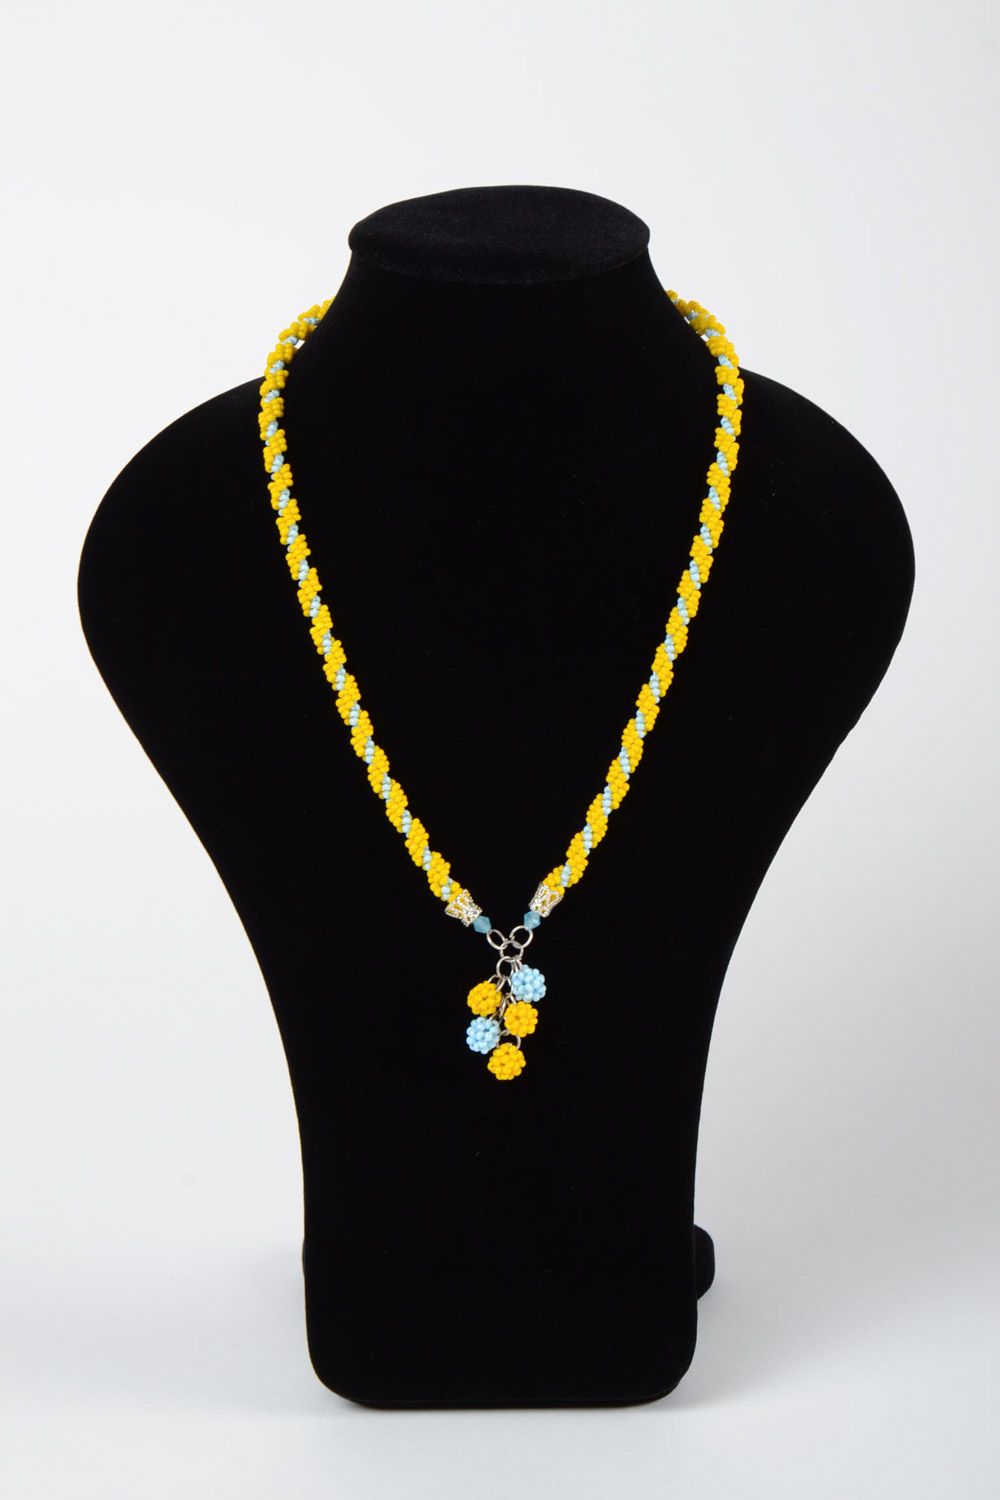 Unusual beautiful stylish handmade long beaded necklace of bright yellow color photo 1